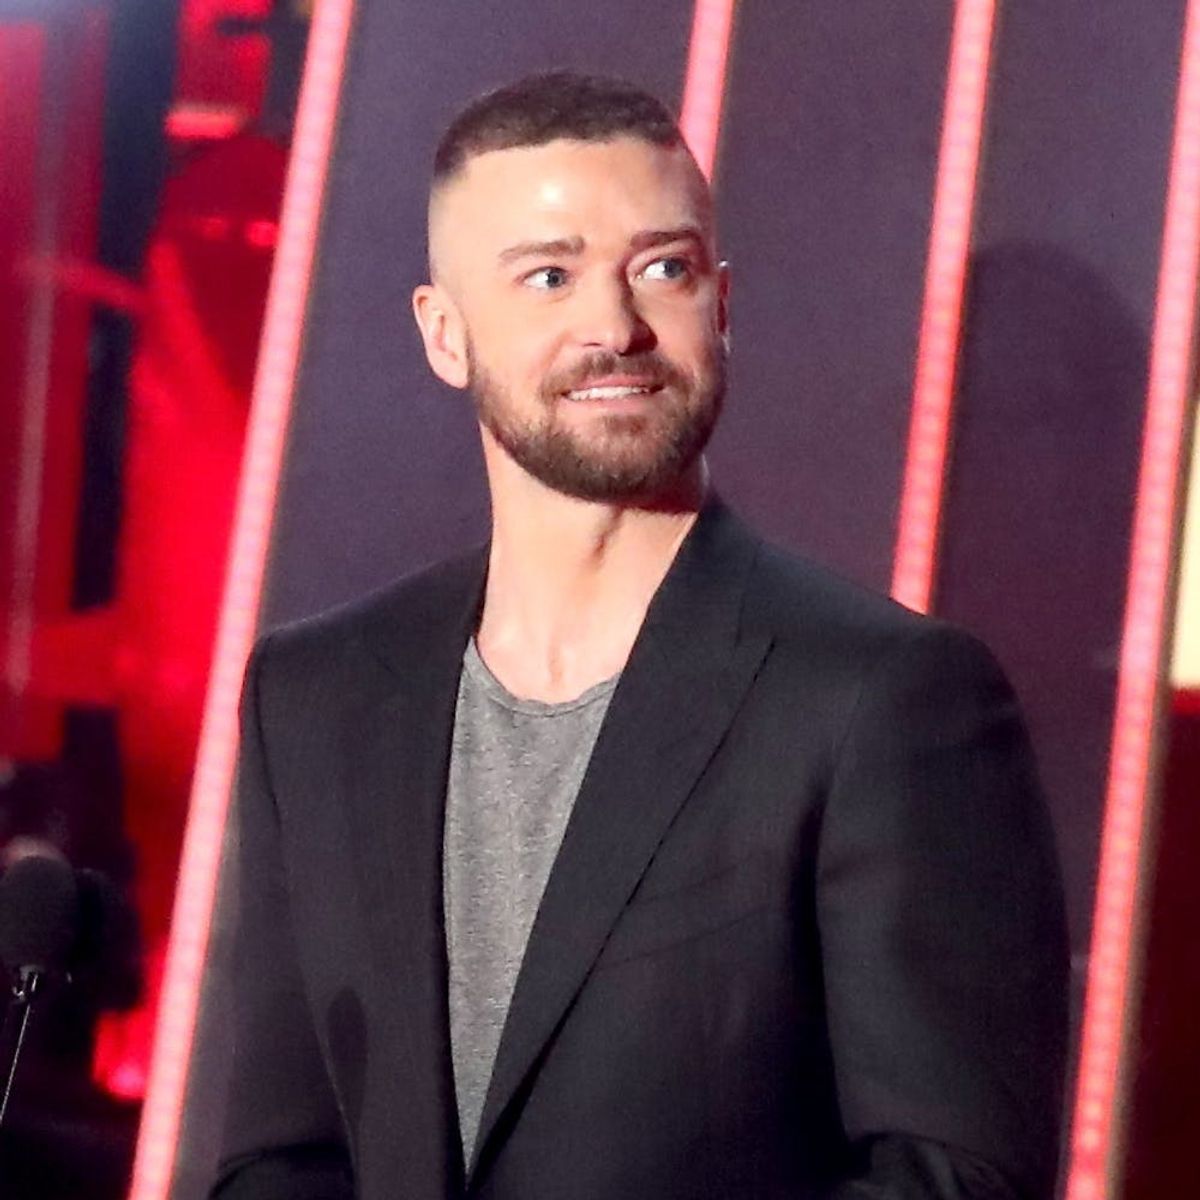 Justin Timberlake Pulled a Kanye Move on Beyoncé & Adele Over Album of the Year